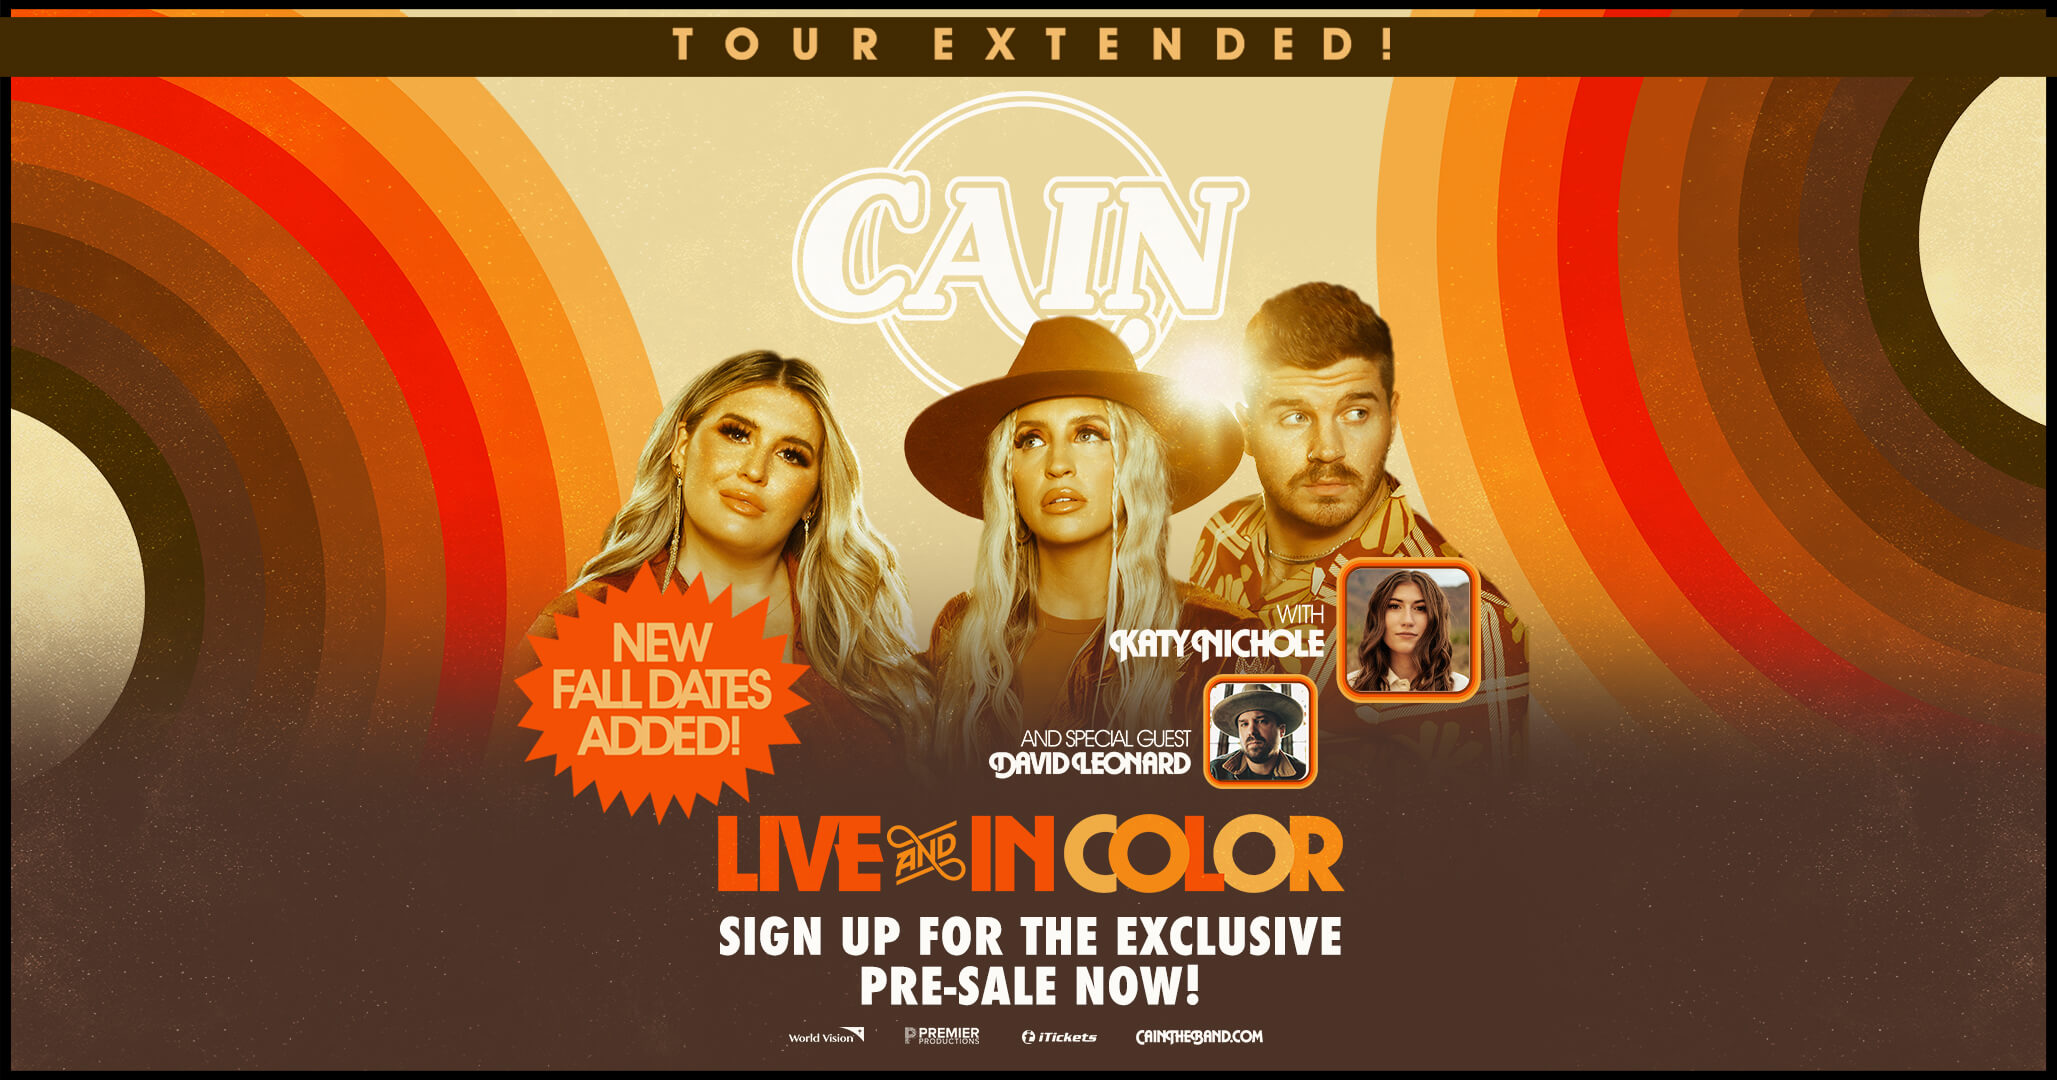 Live & In Color Tour